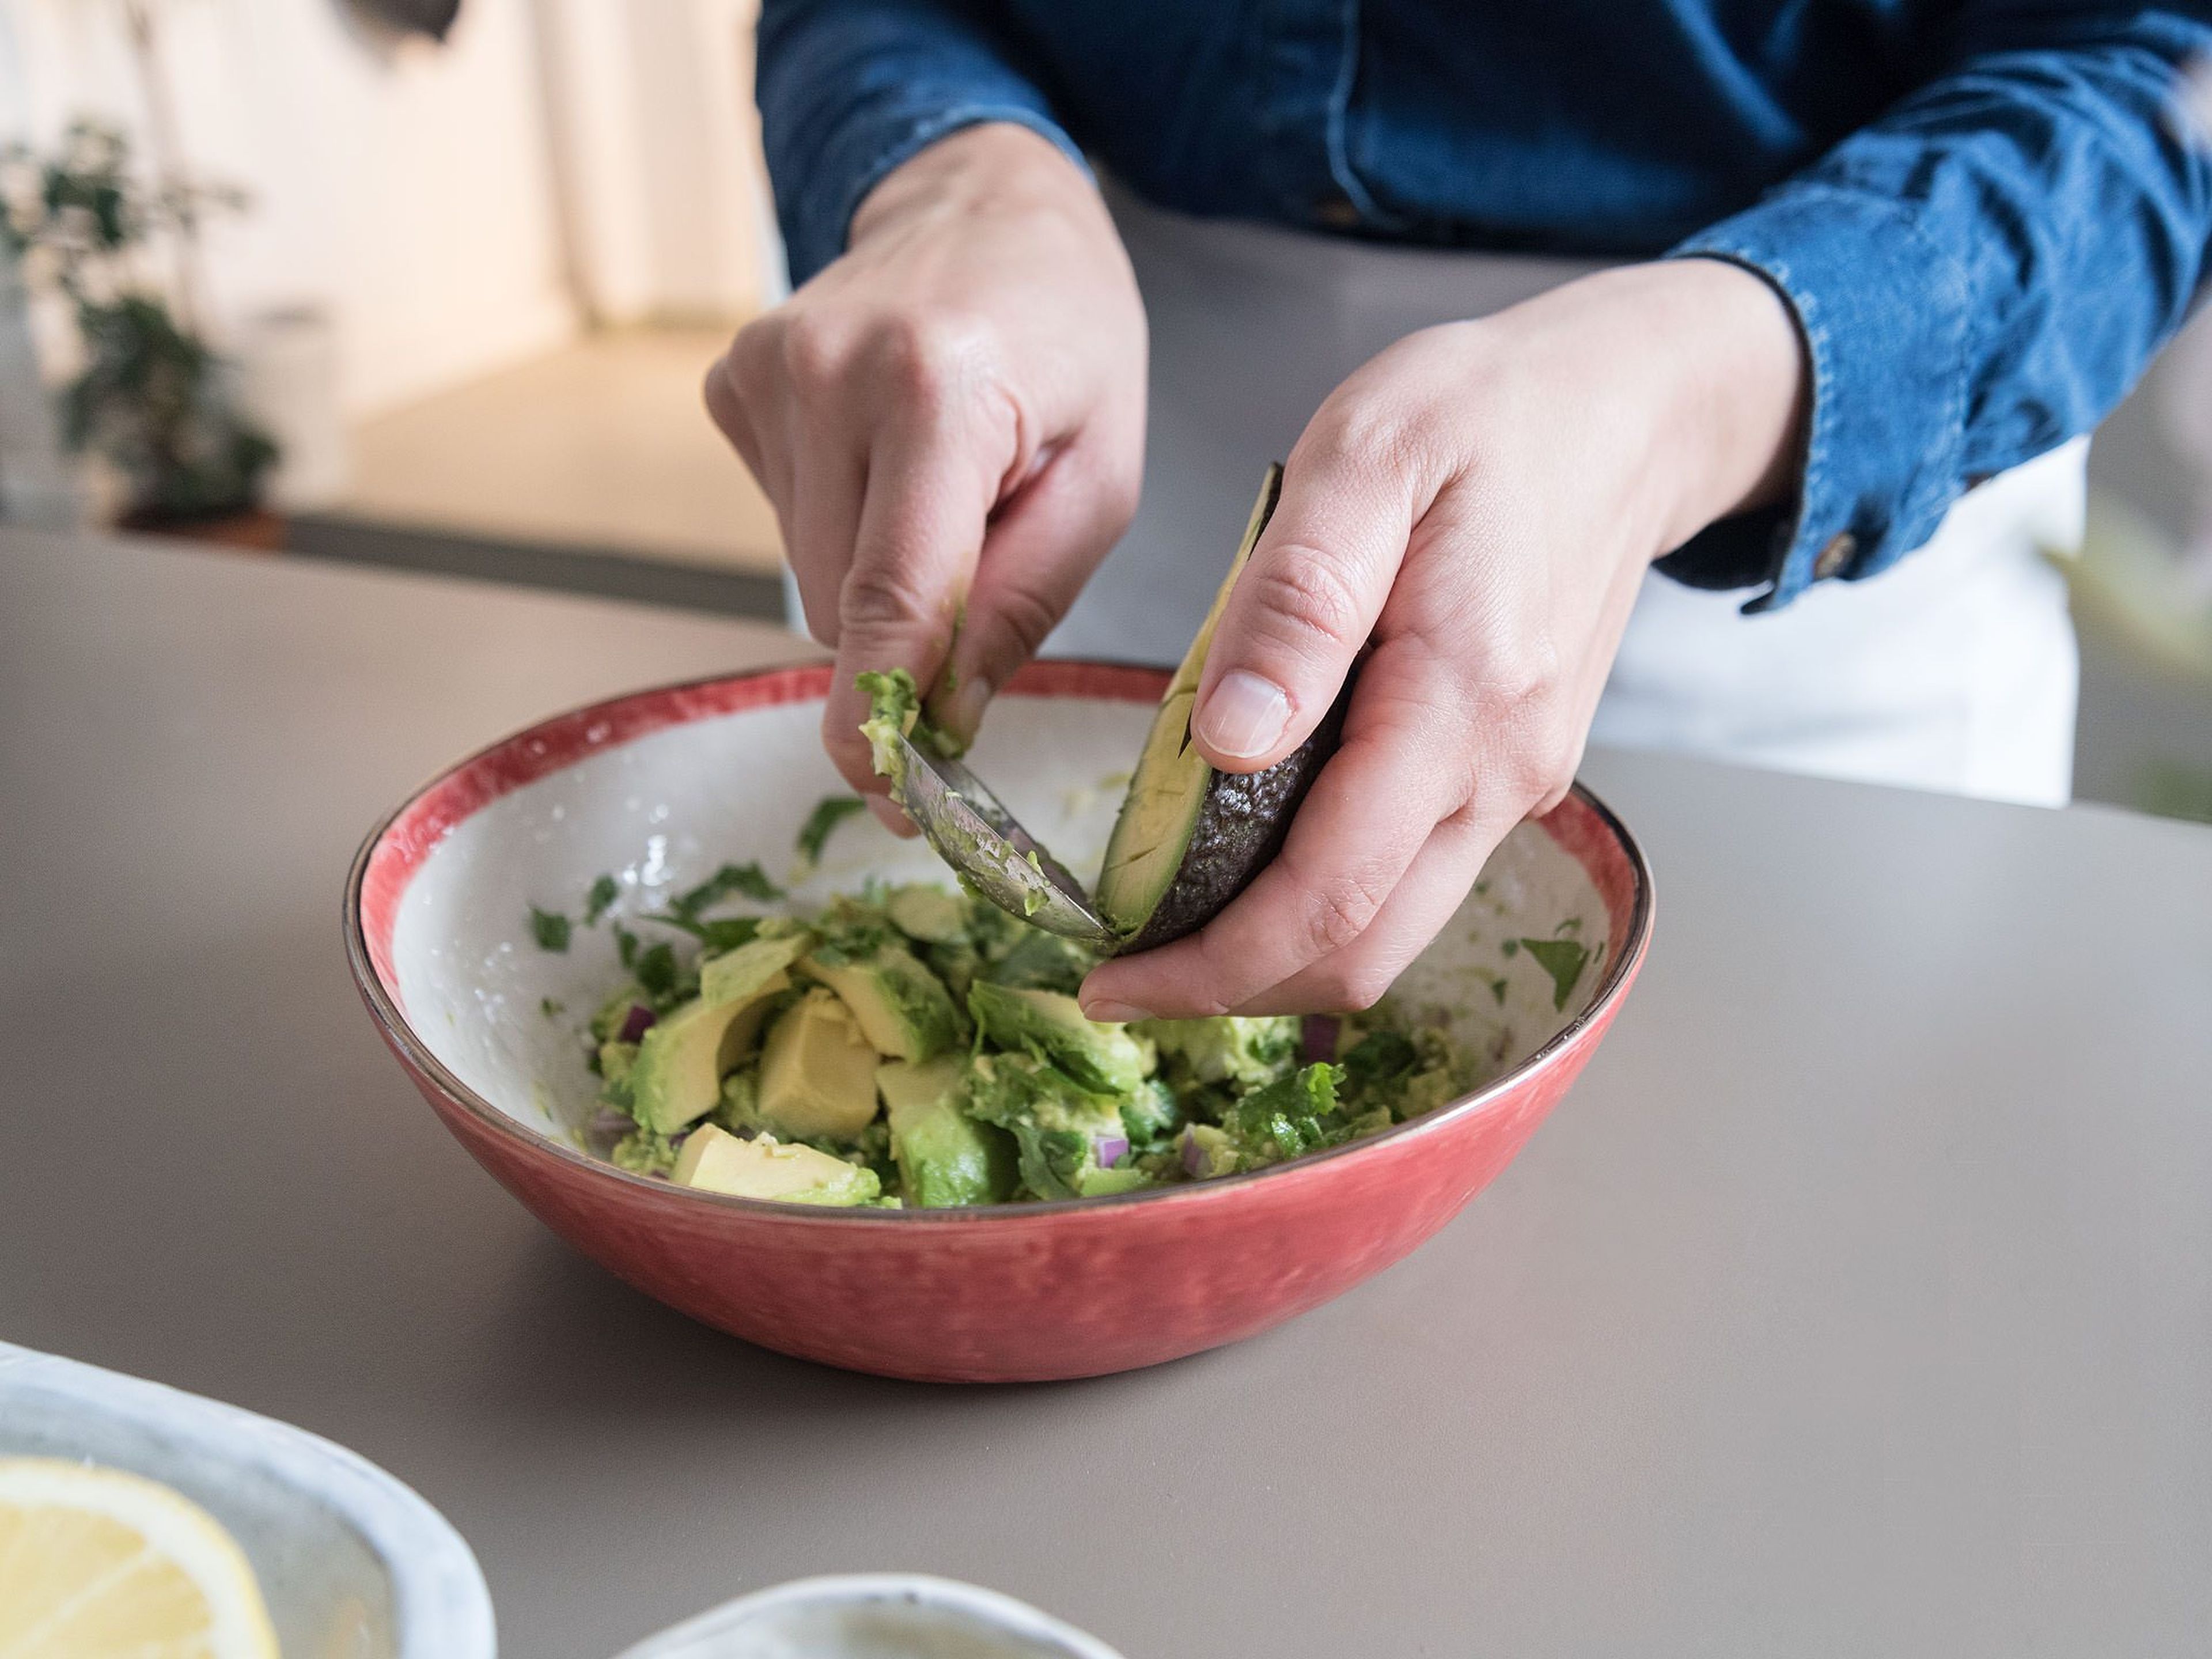 Dice the remaining avocado and fold into the guacamole along with cucumber.